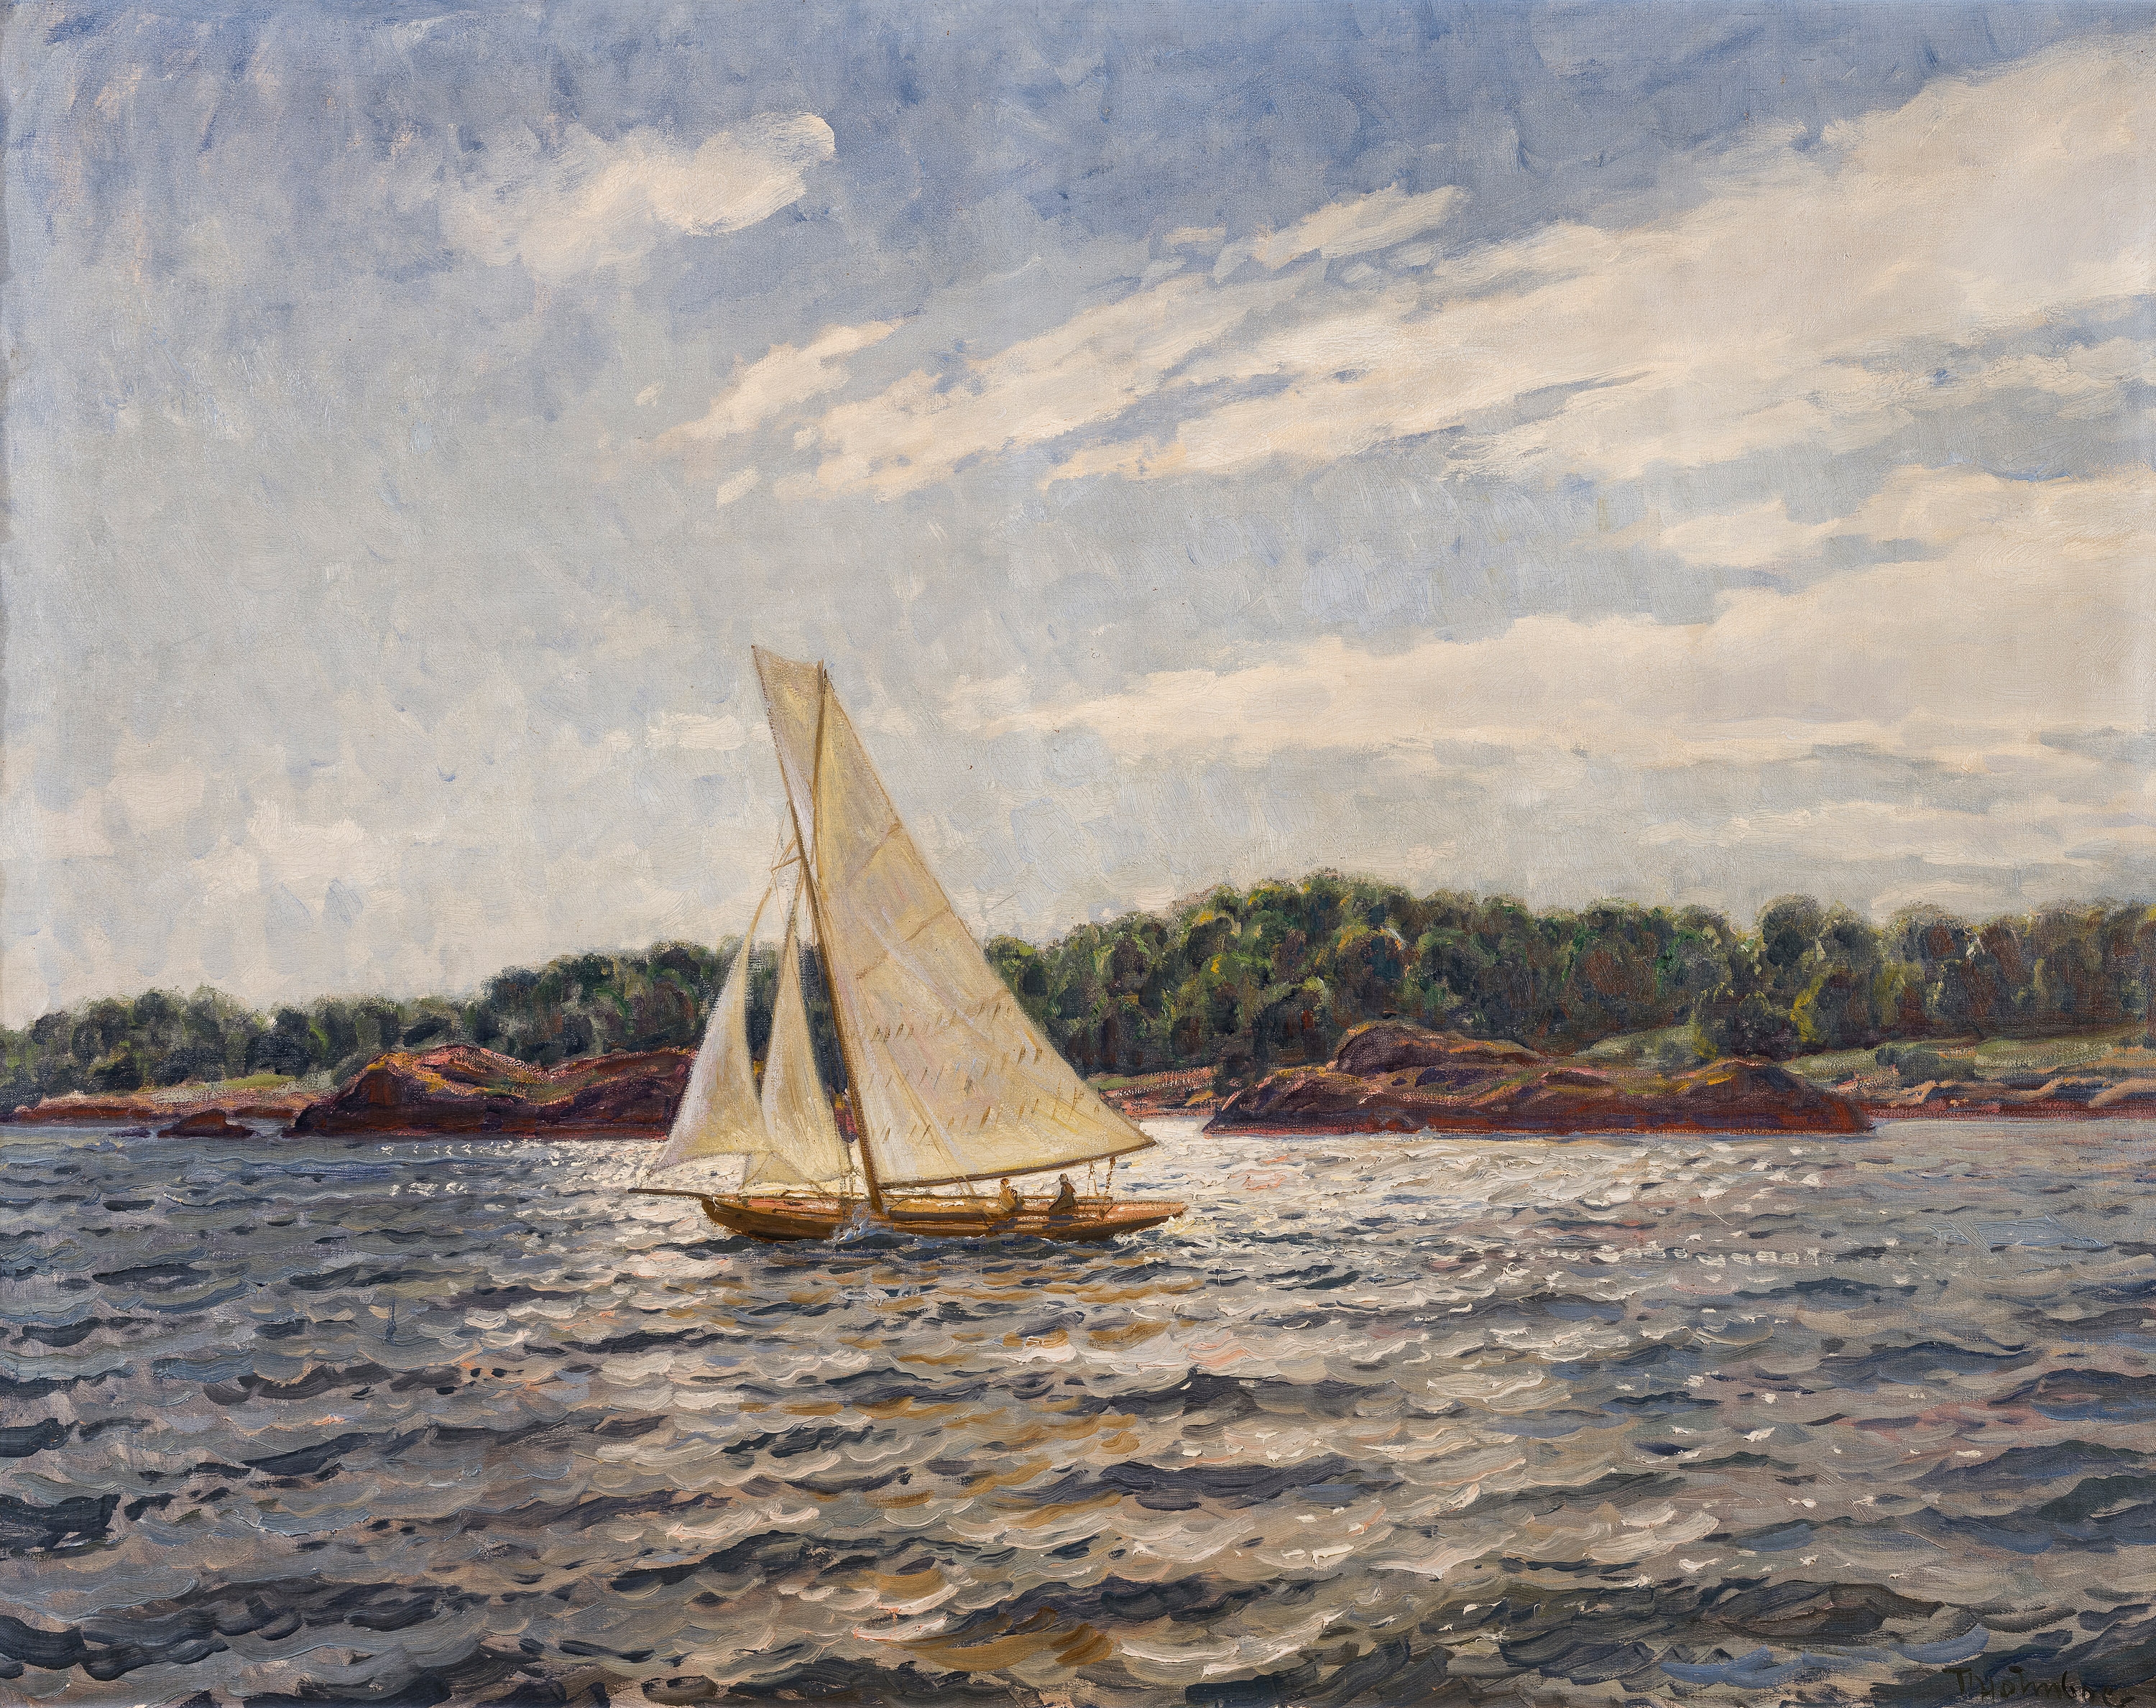 Sailing Boat in fresh breeze by Thorolf Holmboe